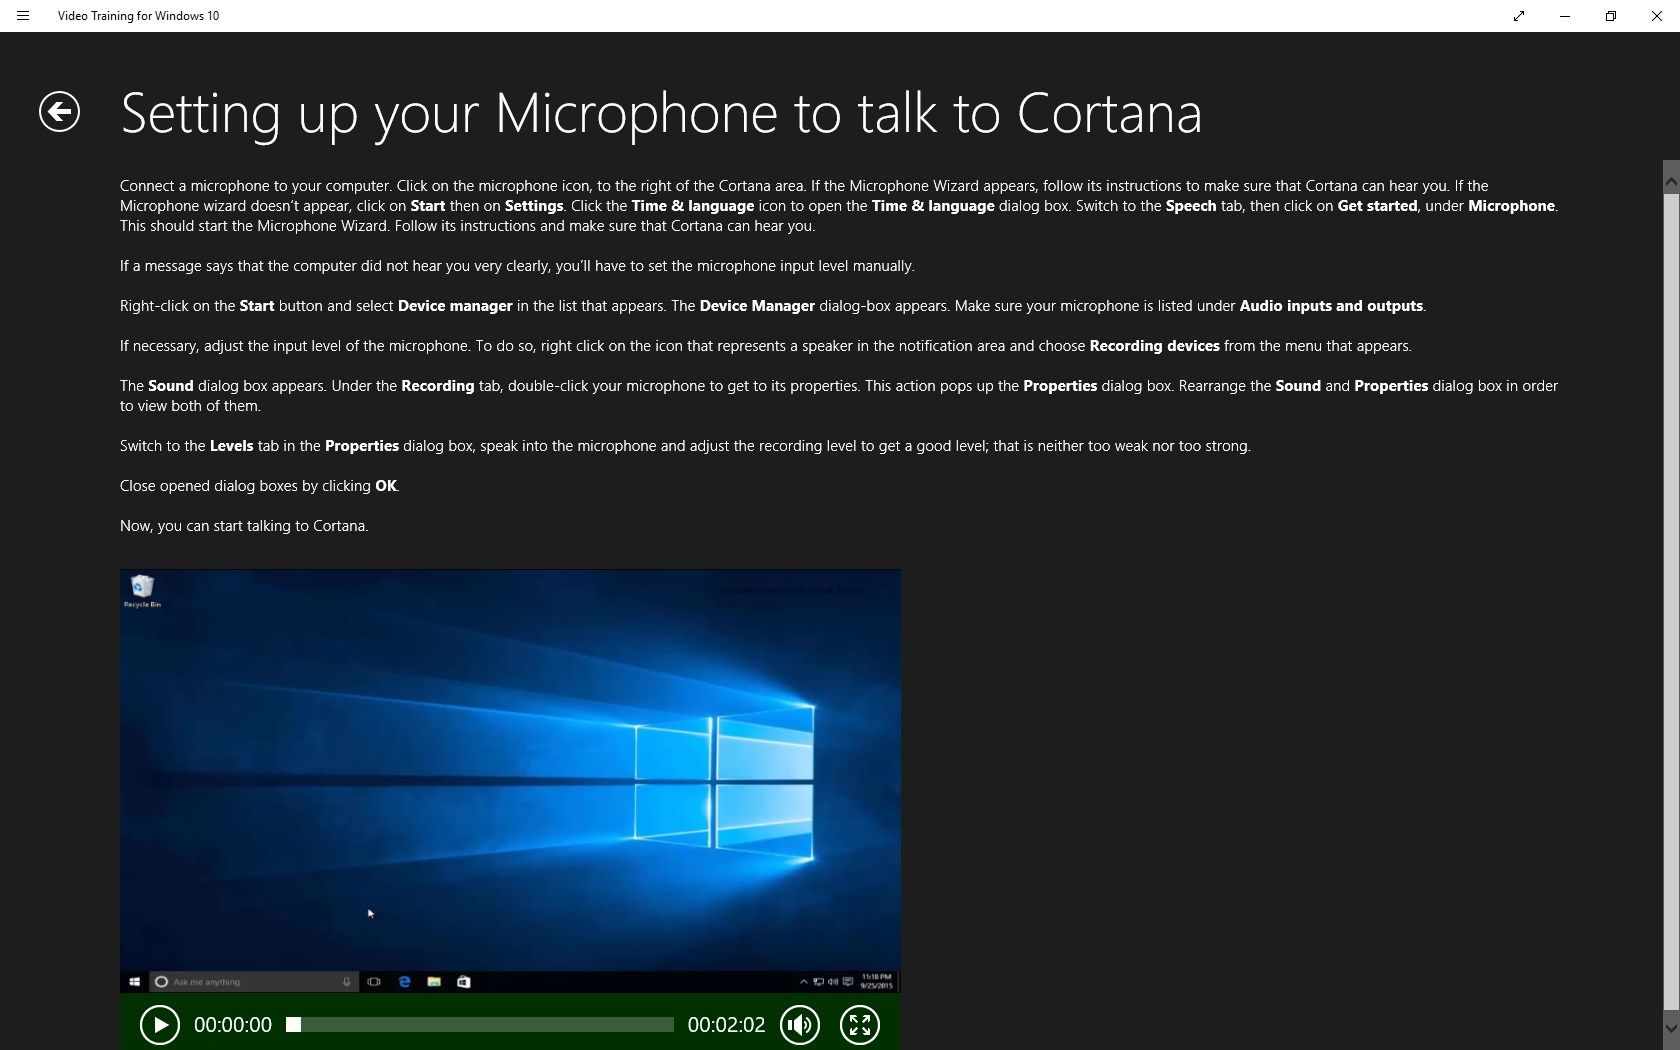 The "Setting up your Microphone to talk to Cortana" topic